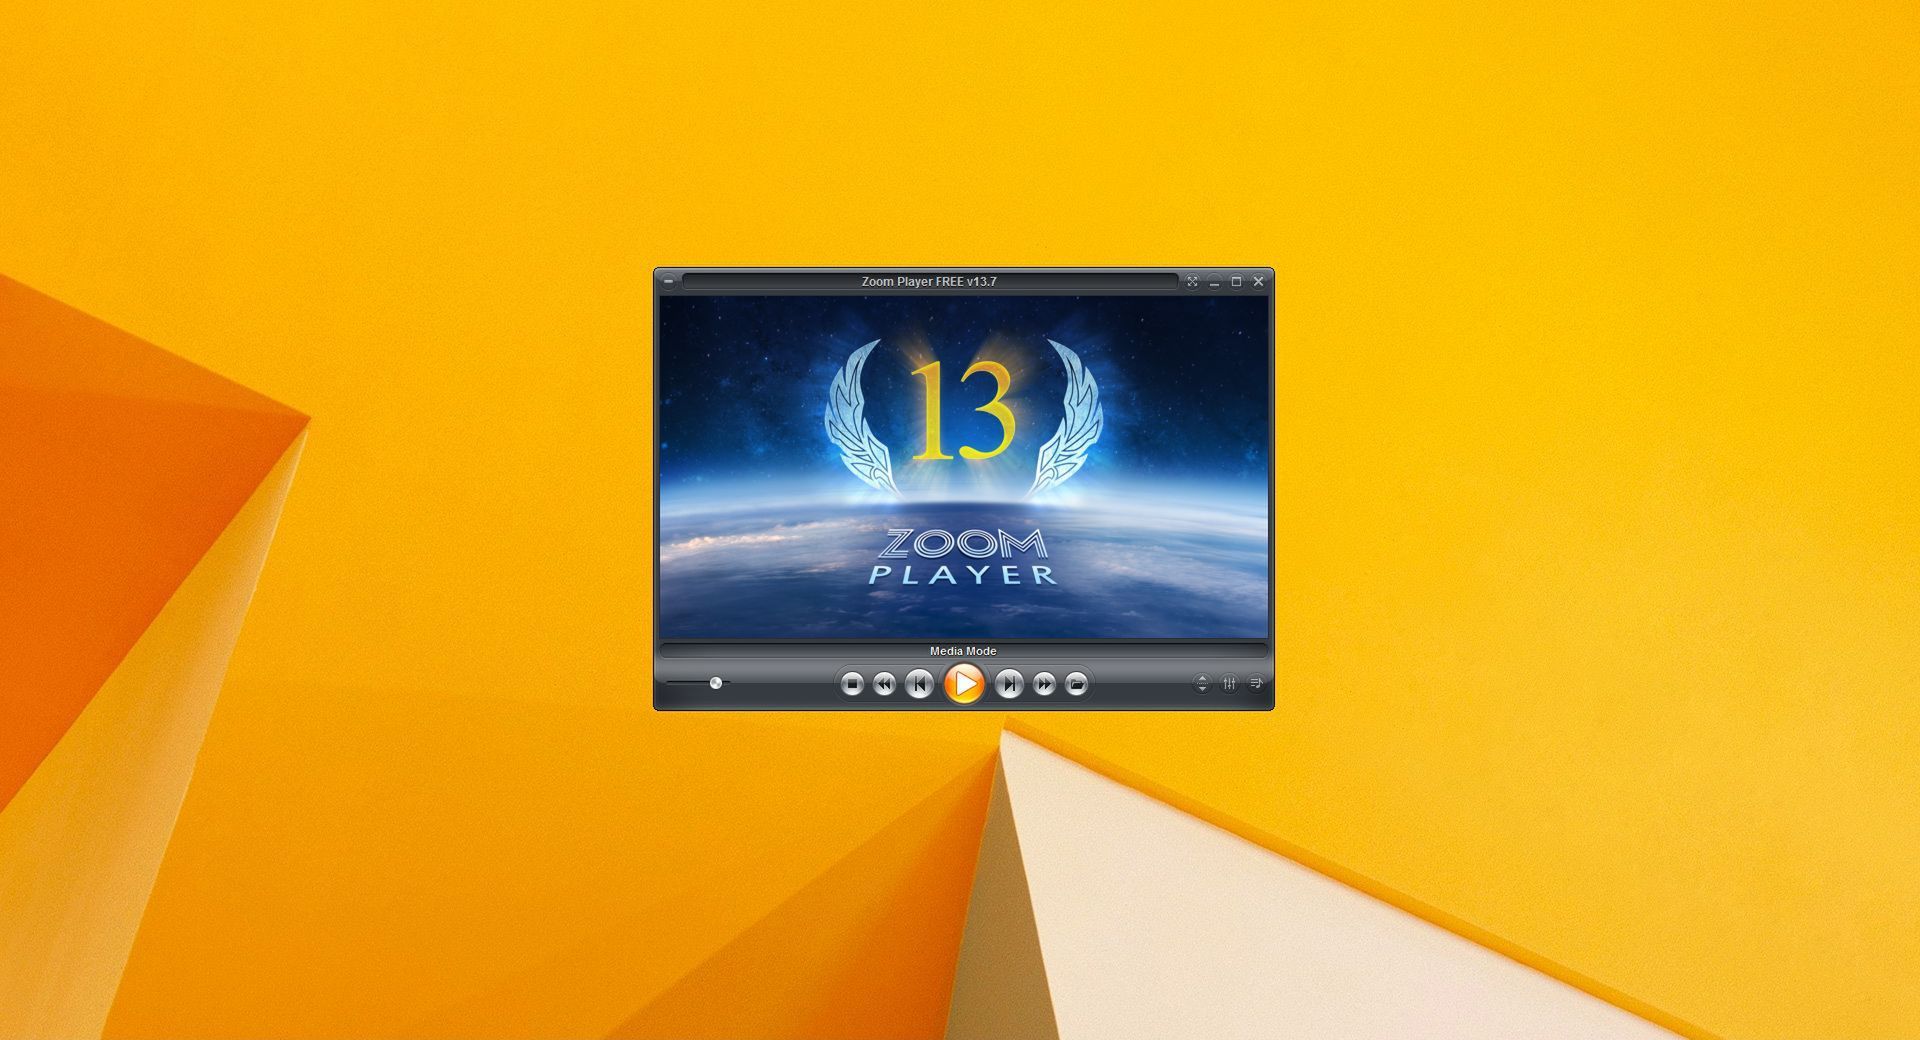 Zoom Player MAX 17.2.1720 for mac download